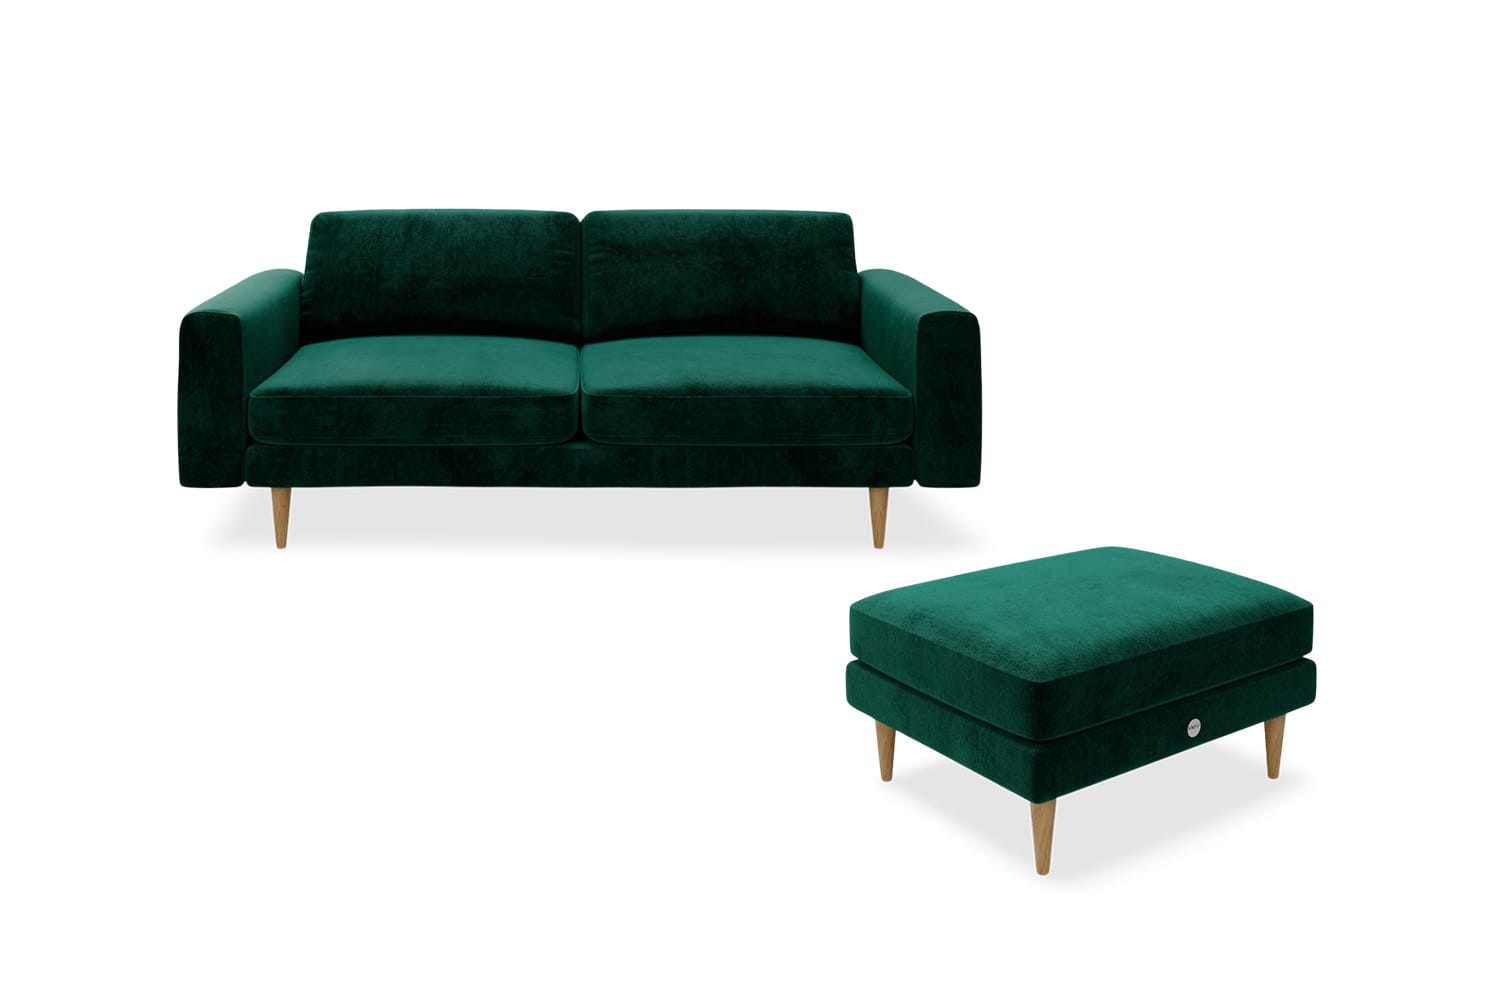 Snug sofa in a box the big chill 3 seater sofa and footstool in forest green with brown wooden legs set